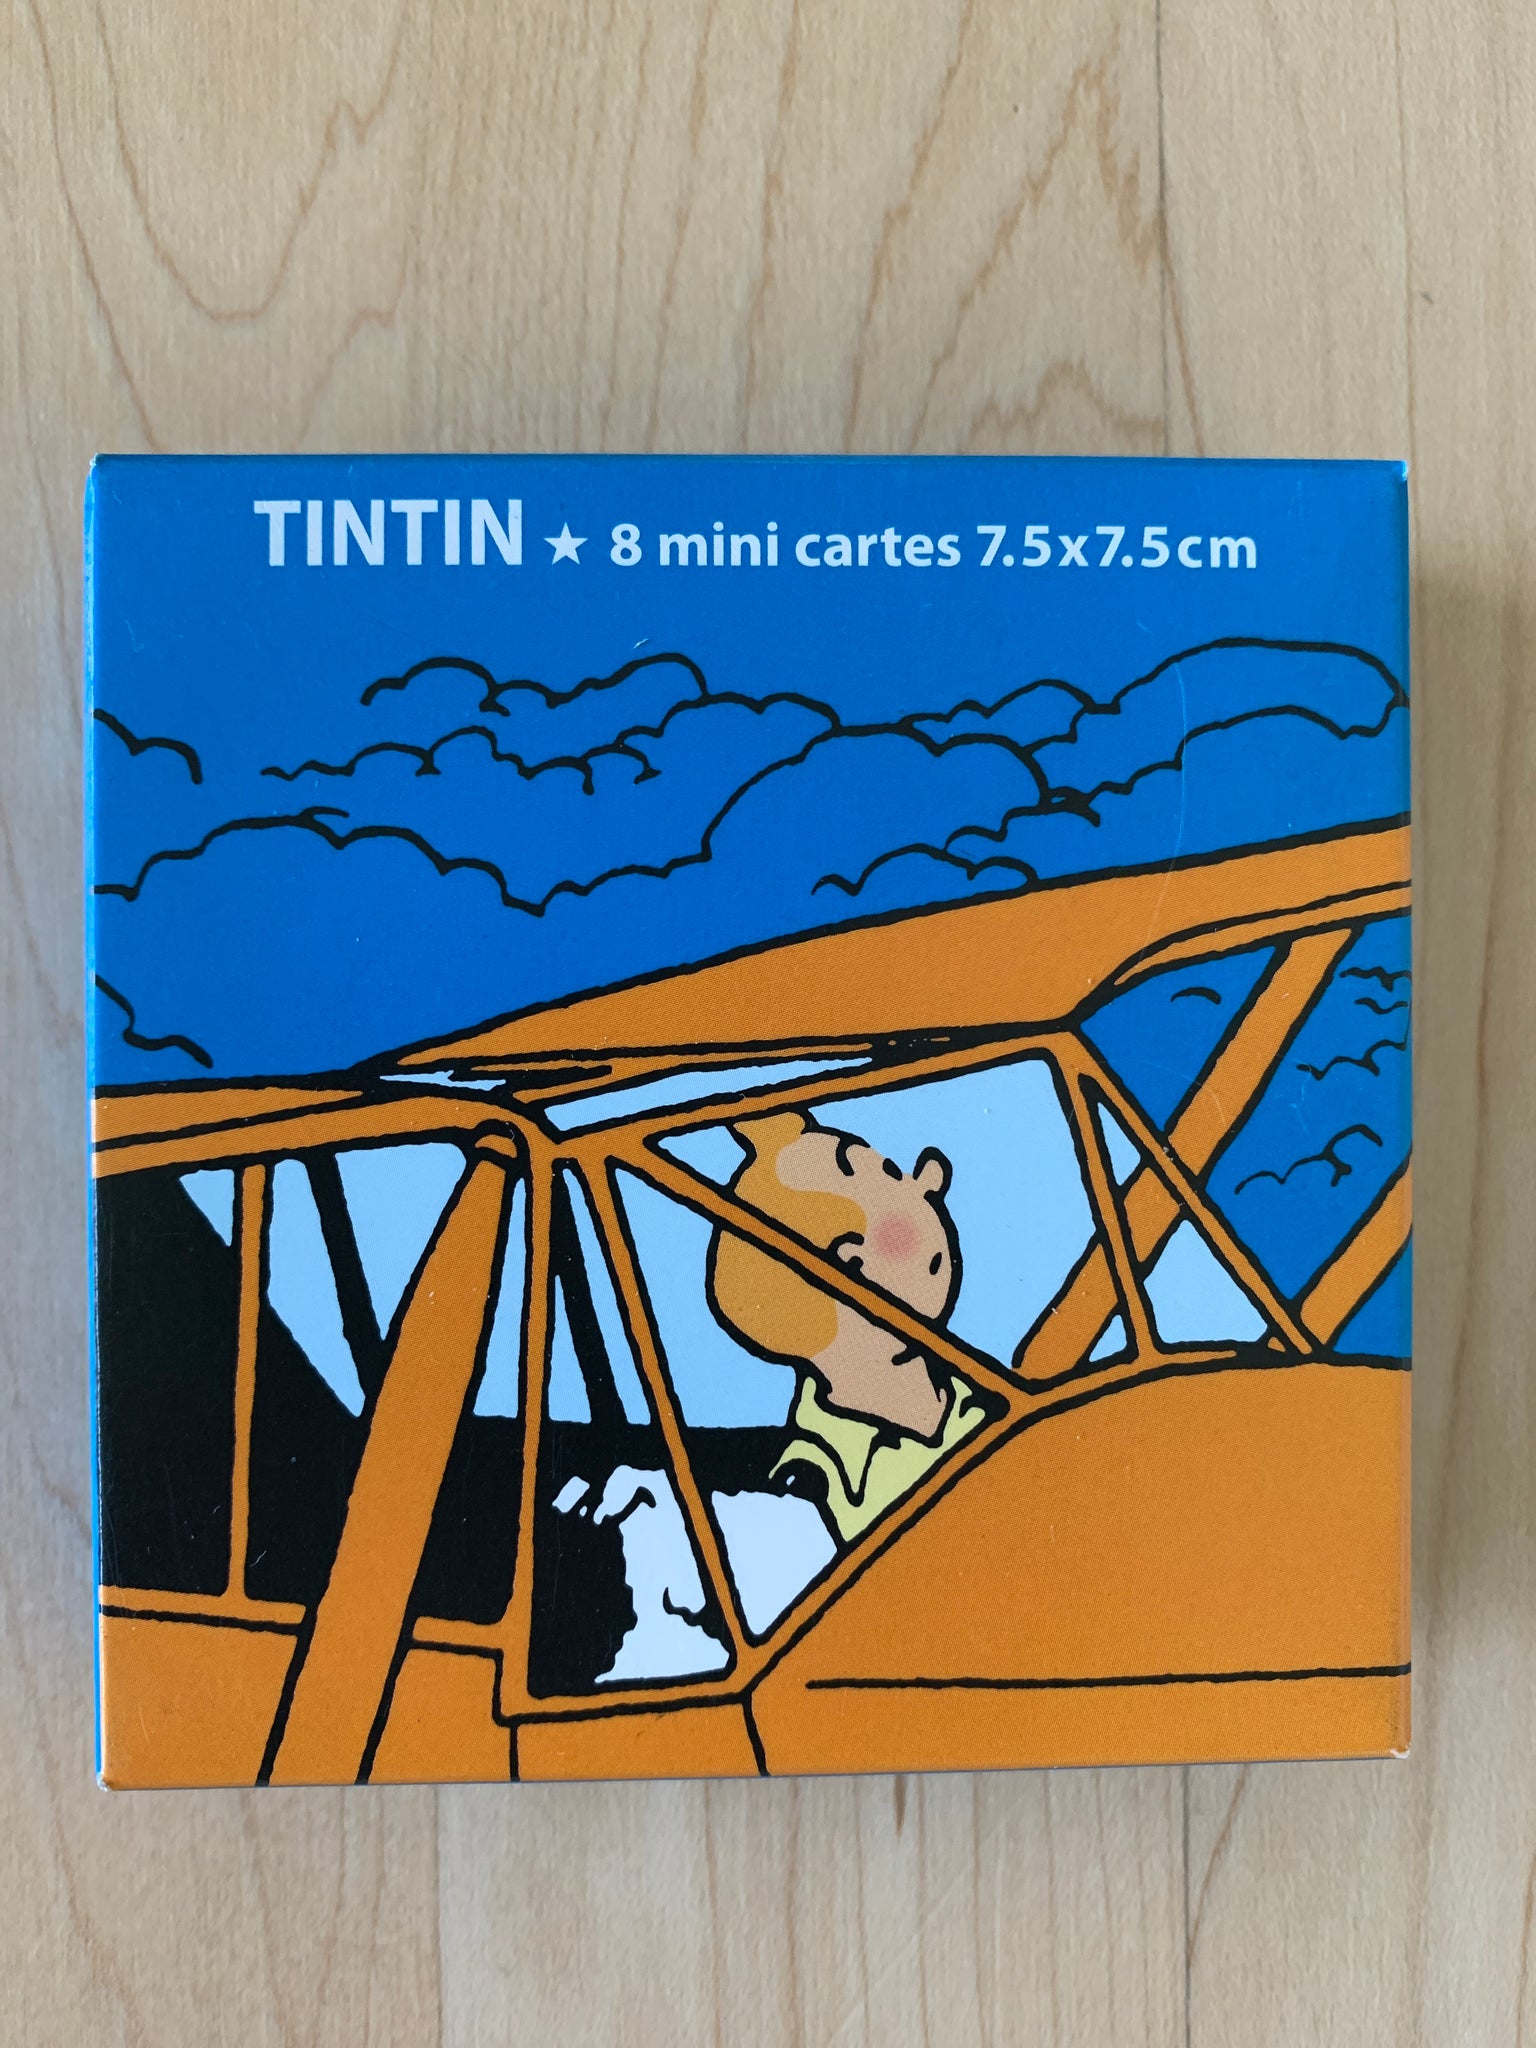 Tintin Mini Gift Note Cards Ref. 31184 – Sausalito Ferry Co